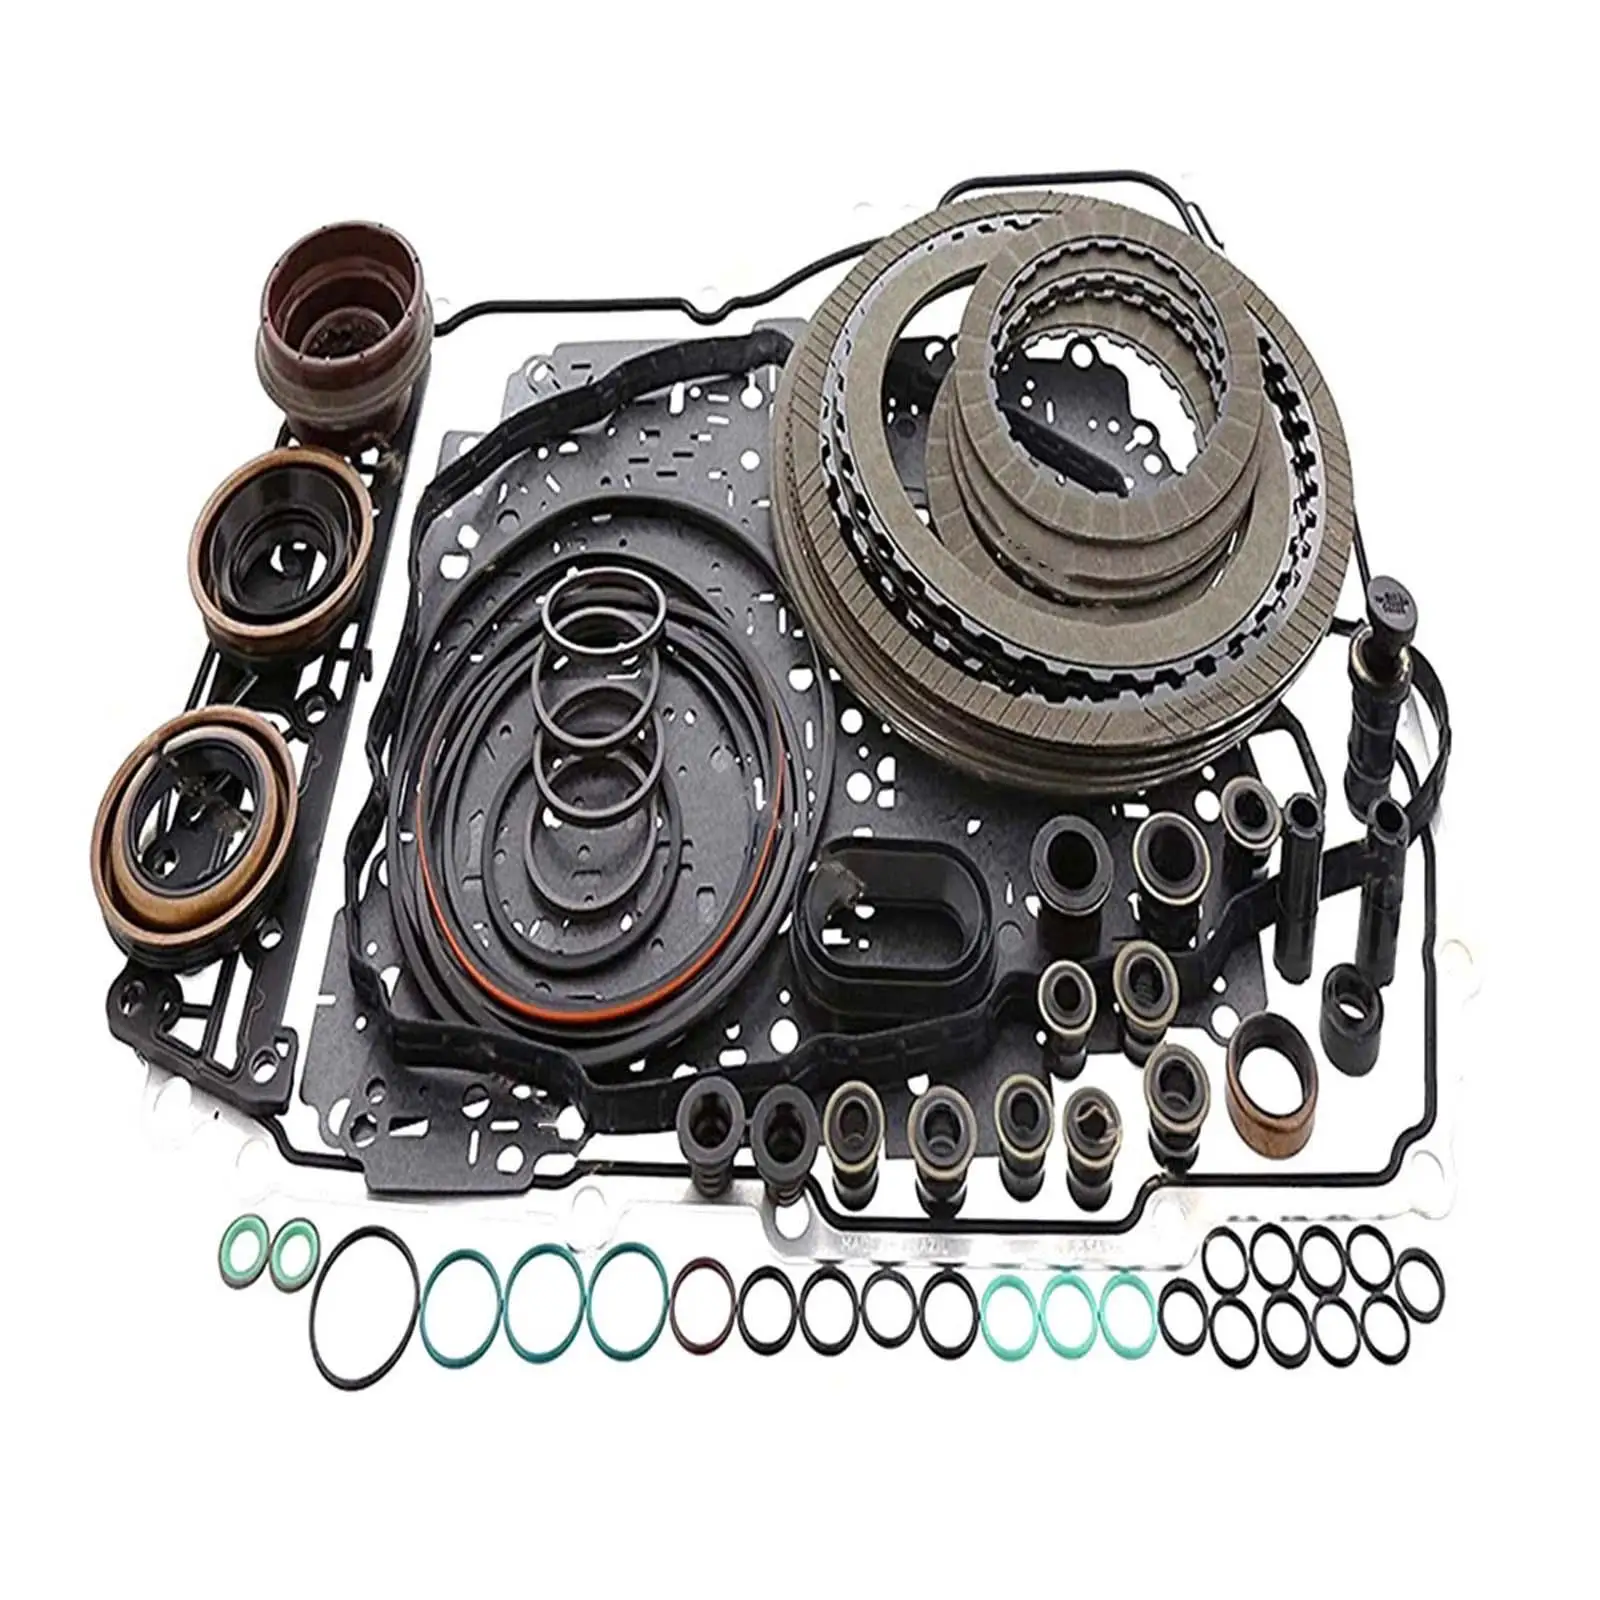 6T40E 6T45E Transmission Overhaul Rebuild B204881A Repair Parts Replacement Stable Performance Professional for Buick